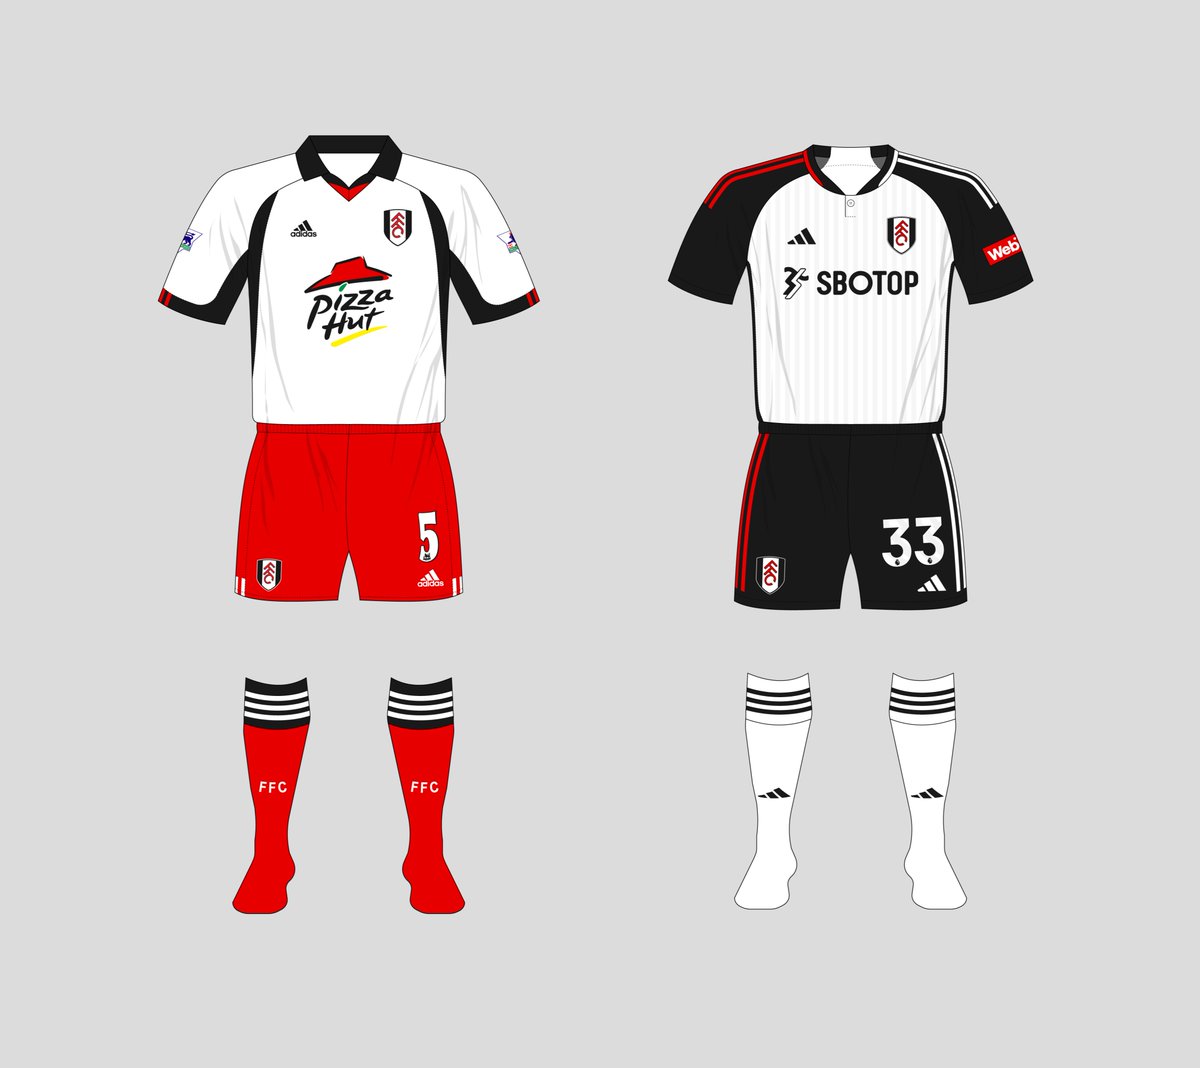 While it might not look like it, Fulham were in a mashup at West Ham today as their default socks are black this season It's certainly a more familiar look than that seen at Upton Park in their first PL season, also a 2-0 win #FFC museumofjerseys.com/fulham/#2001-02